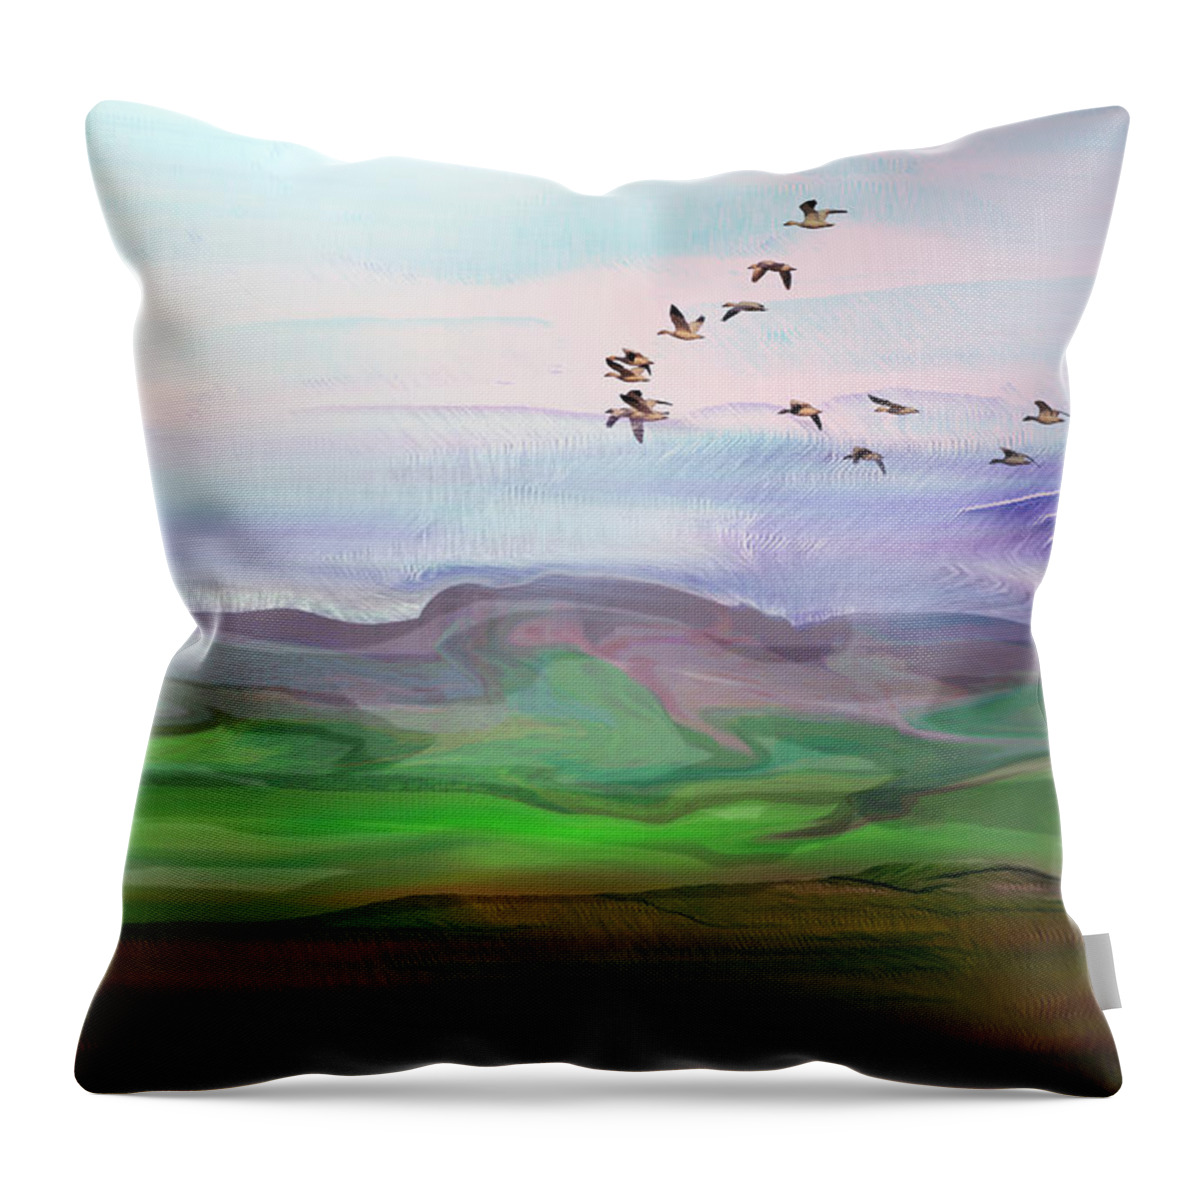 Digital Landscape Throw Pillow featuring the digital art Fly By Digital Painting by Kae Cheatham